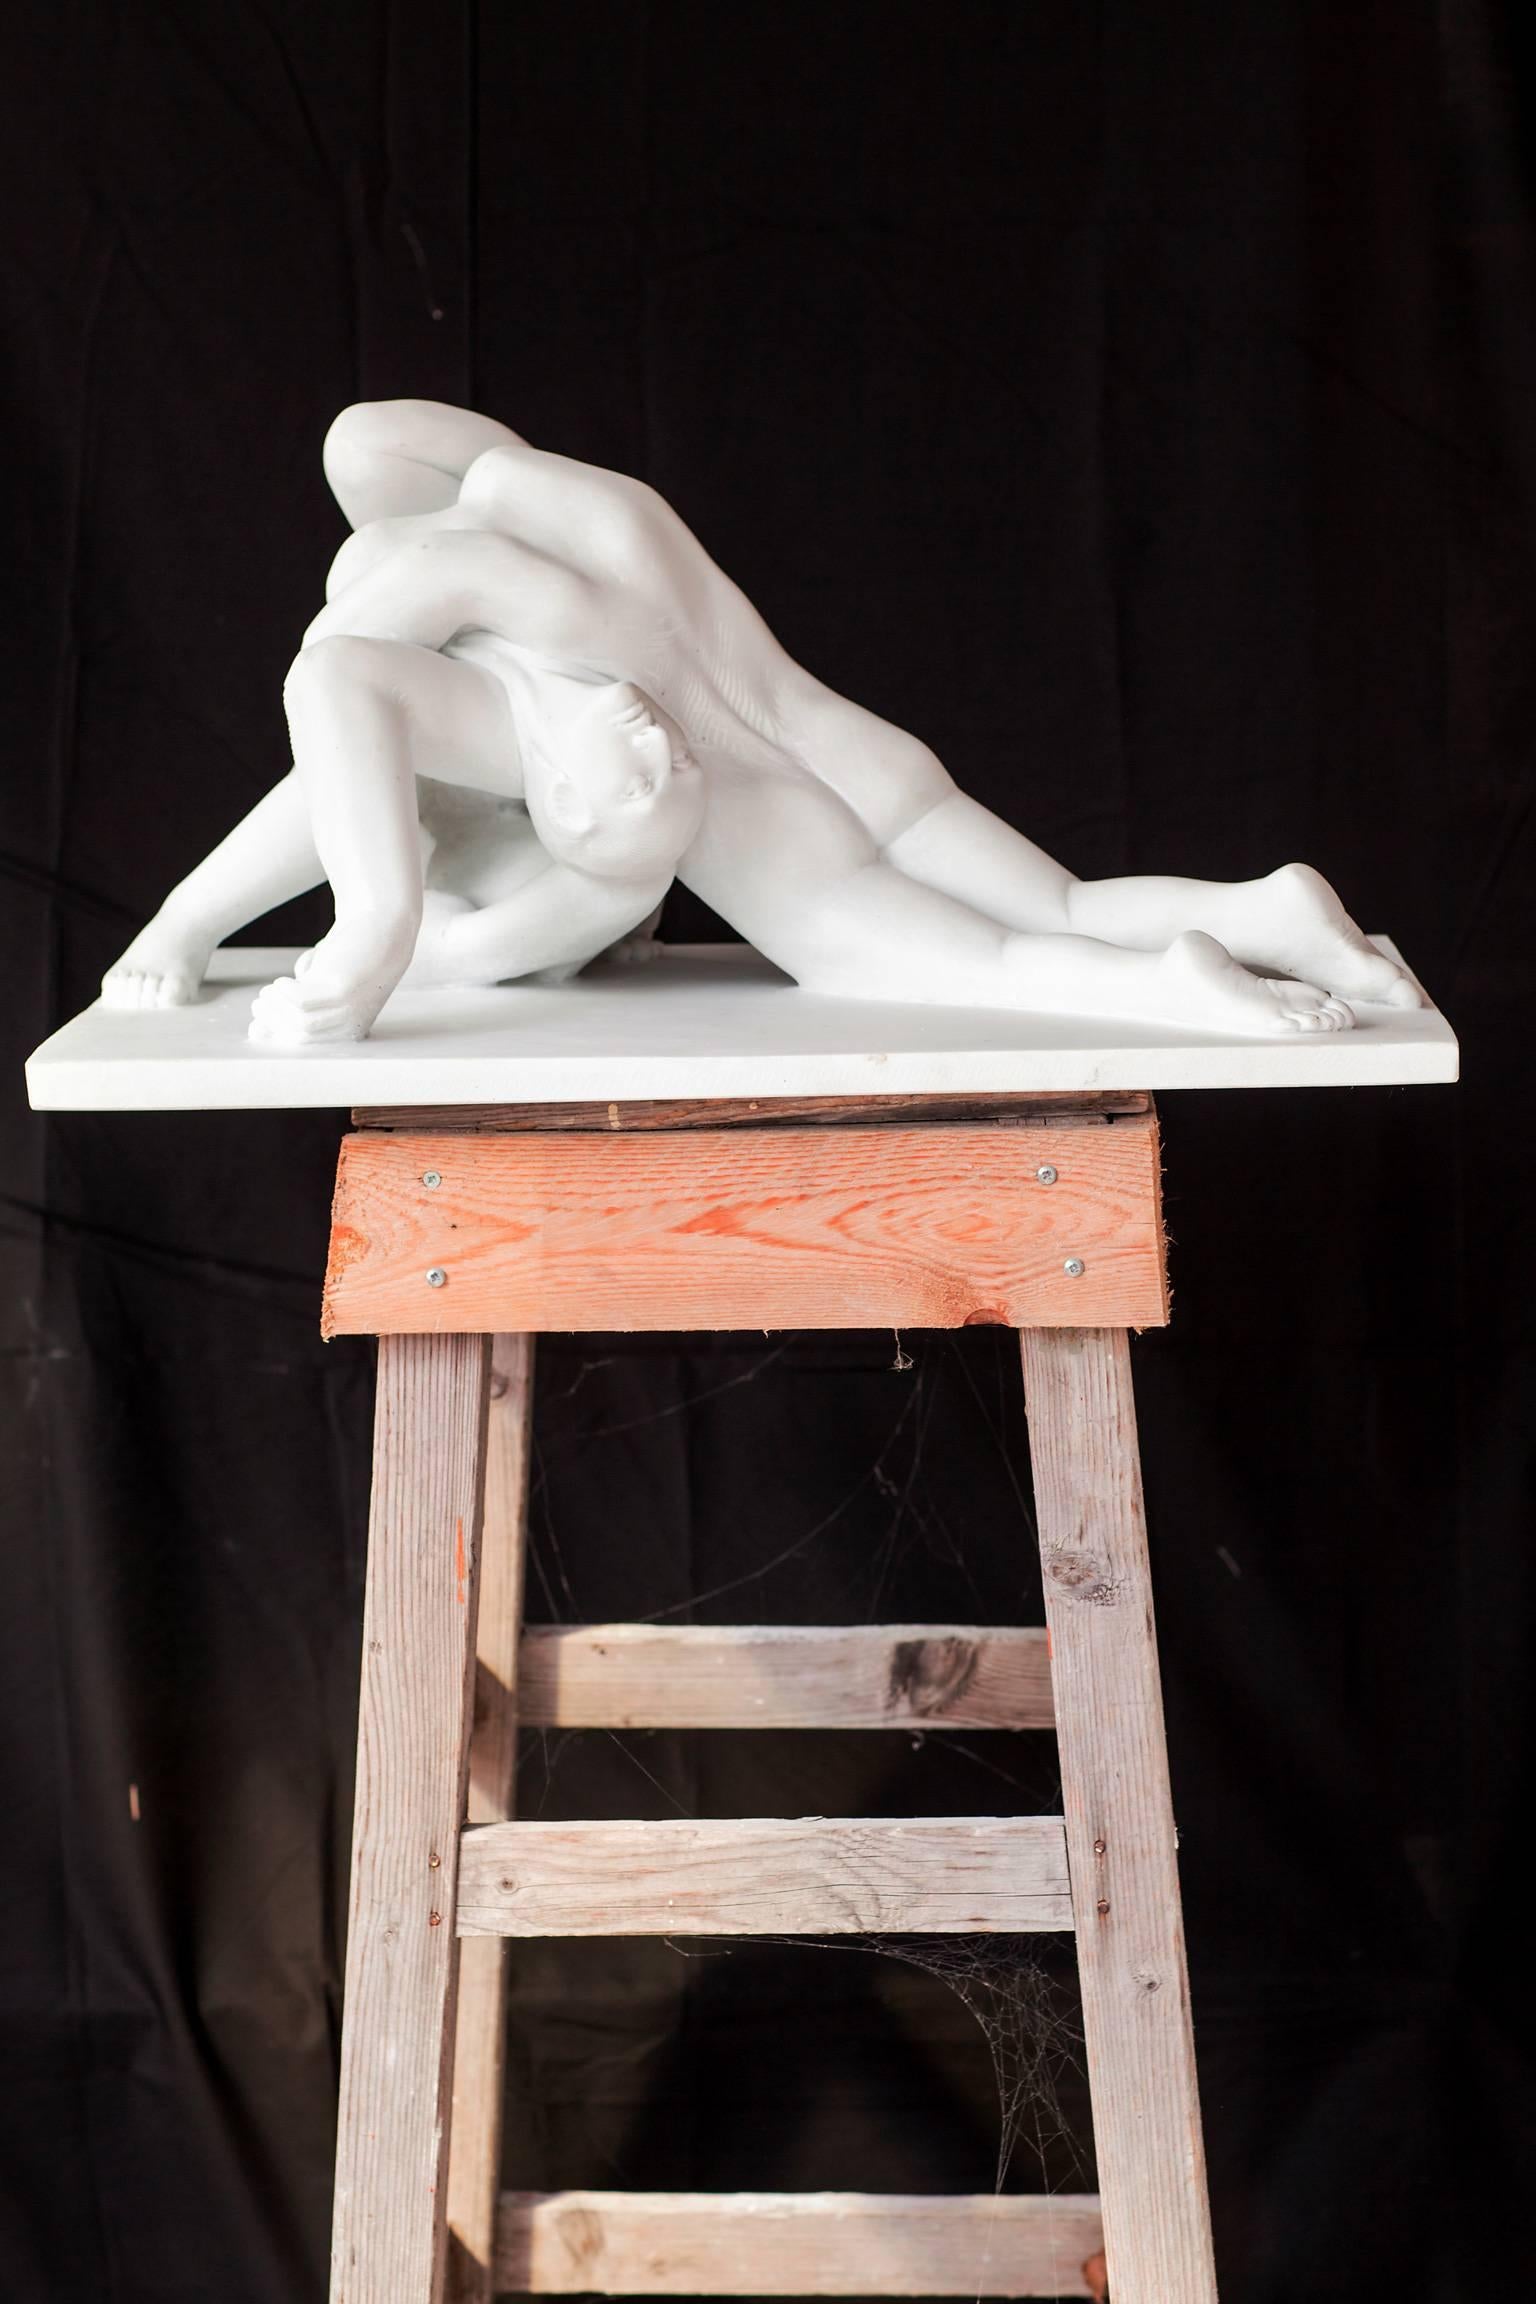 PIETA by Lorenzo Vignoli (2012)

a striking sculpture hand carved from a single piece of pristine, all white Carrara marble 

38.5in W x 20in H x 18in D 
98cm H x 50cm W x 46cm D

Lorenzo Vignoli studied Painting at Central Saint Martin's School of